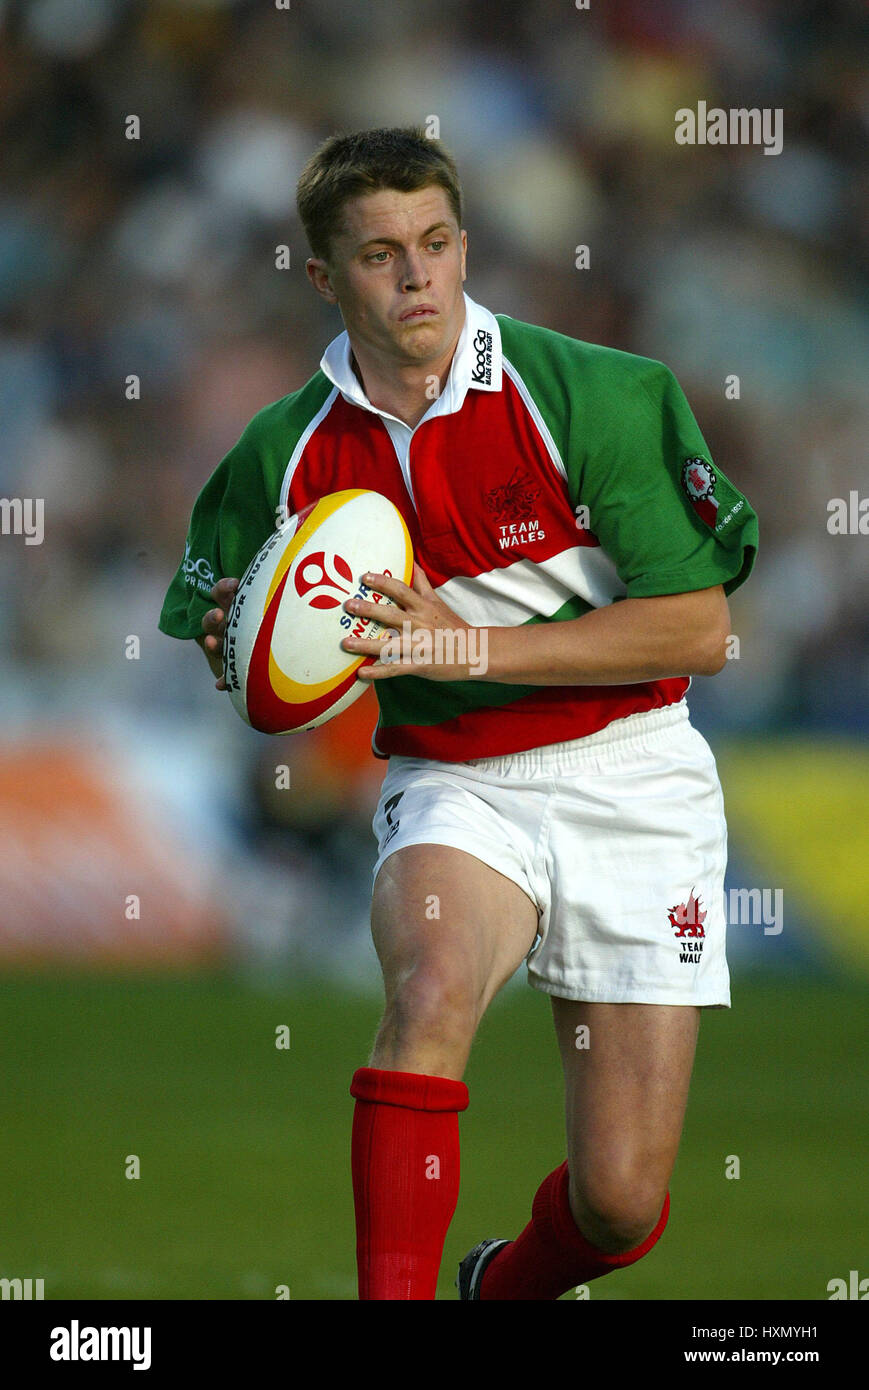 ARWEL CAMBER WALES RU CITY OF MANCHESTER STADIUM MANCHESTER 3. August 2002 Stockfoto